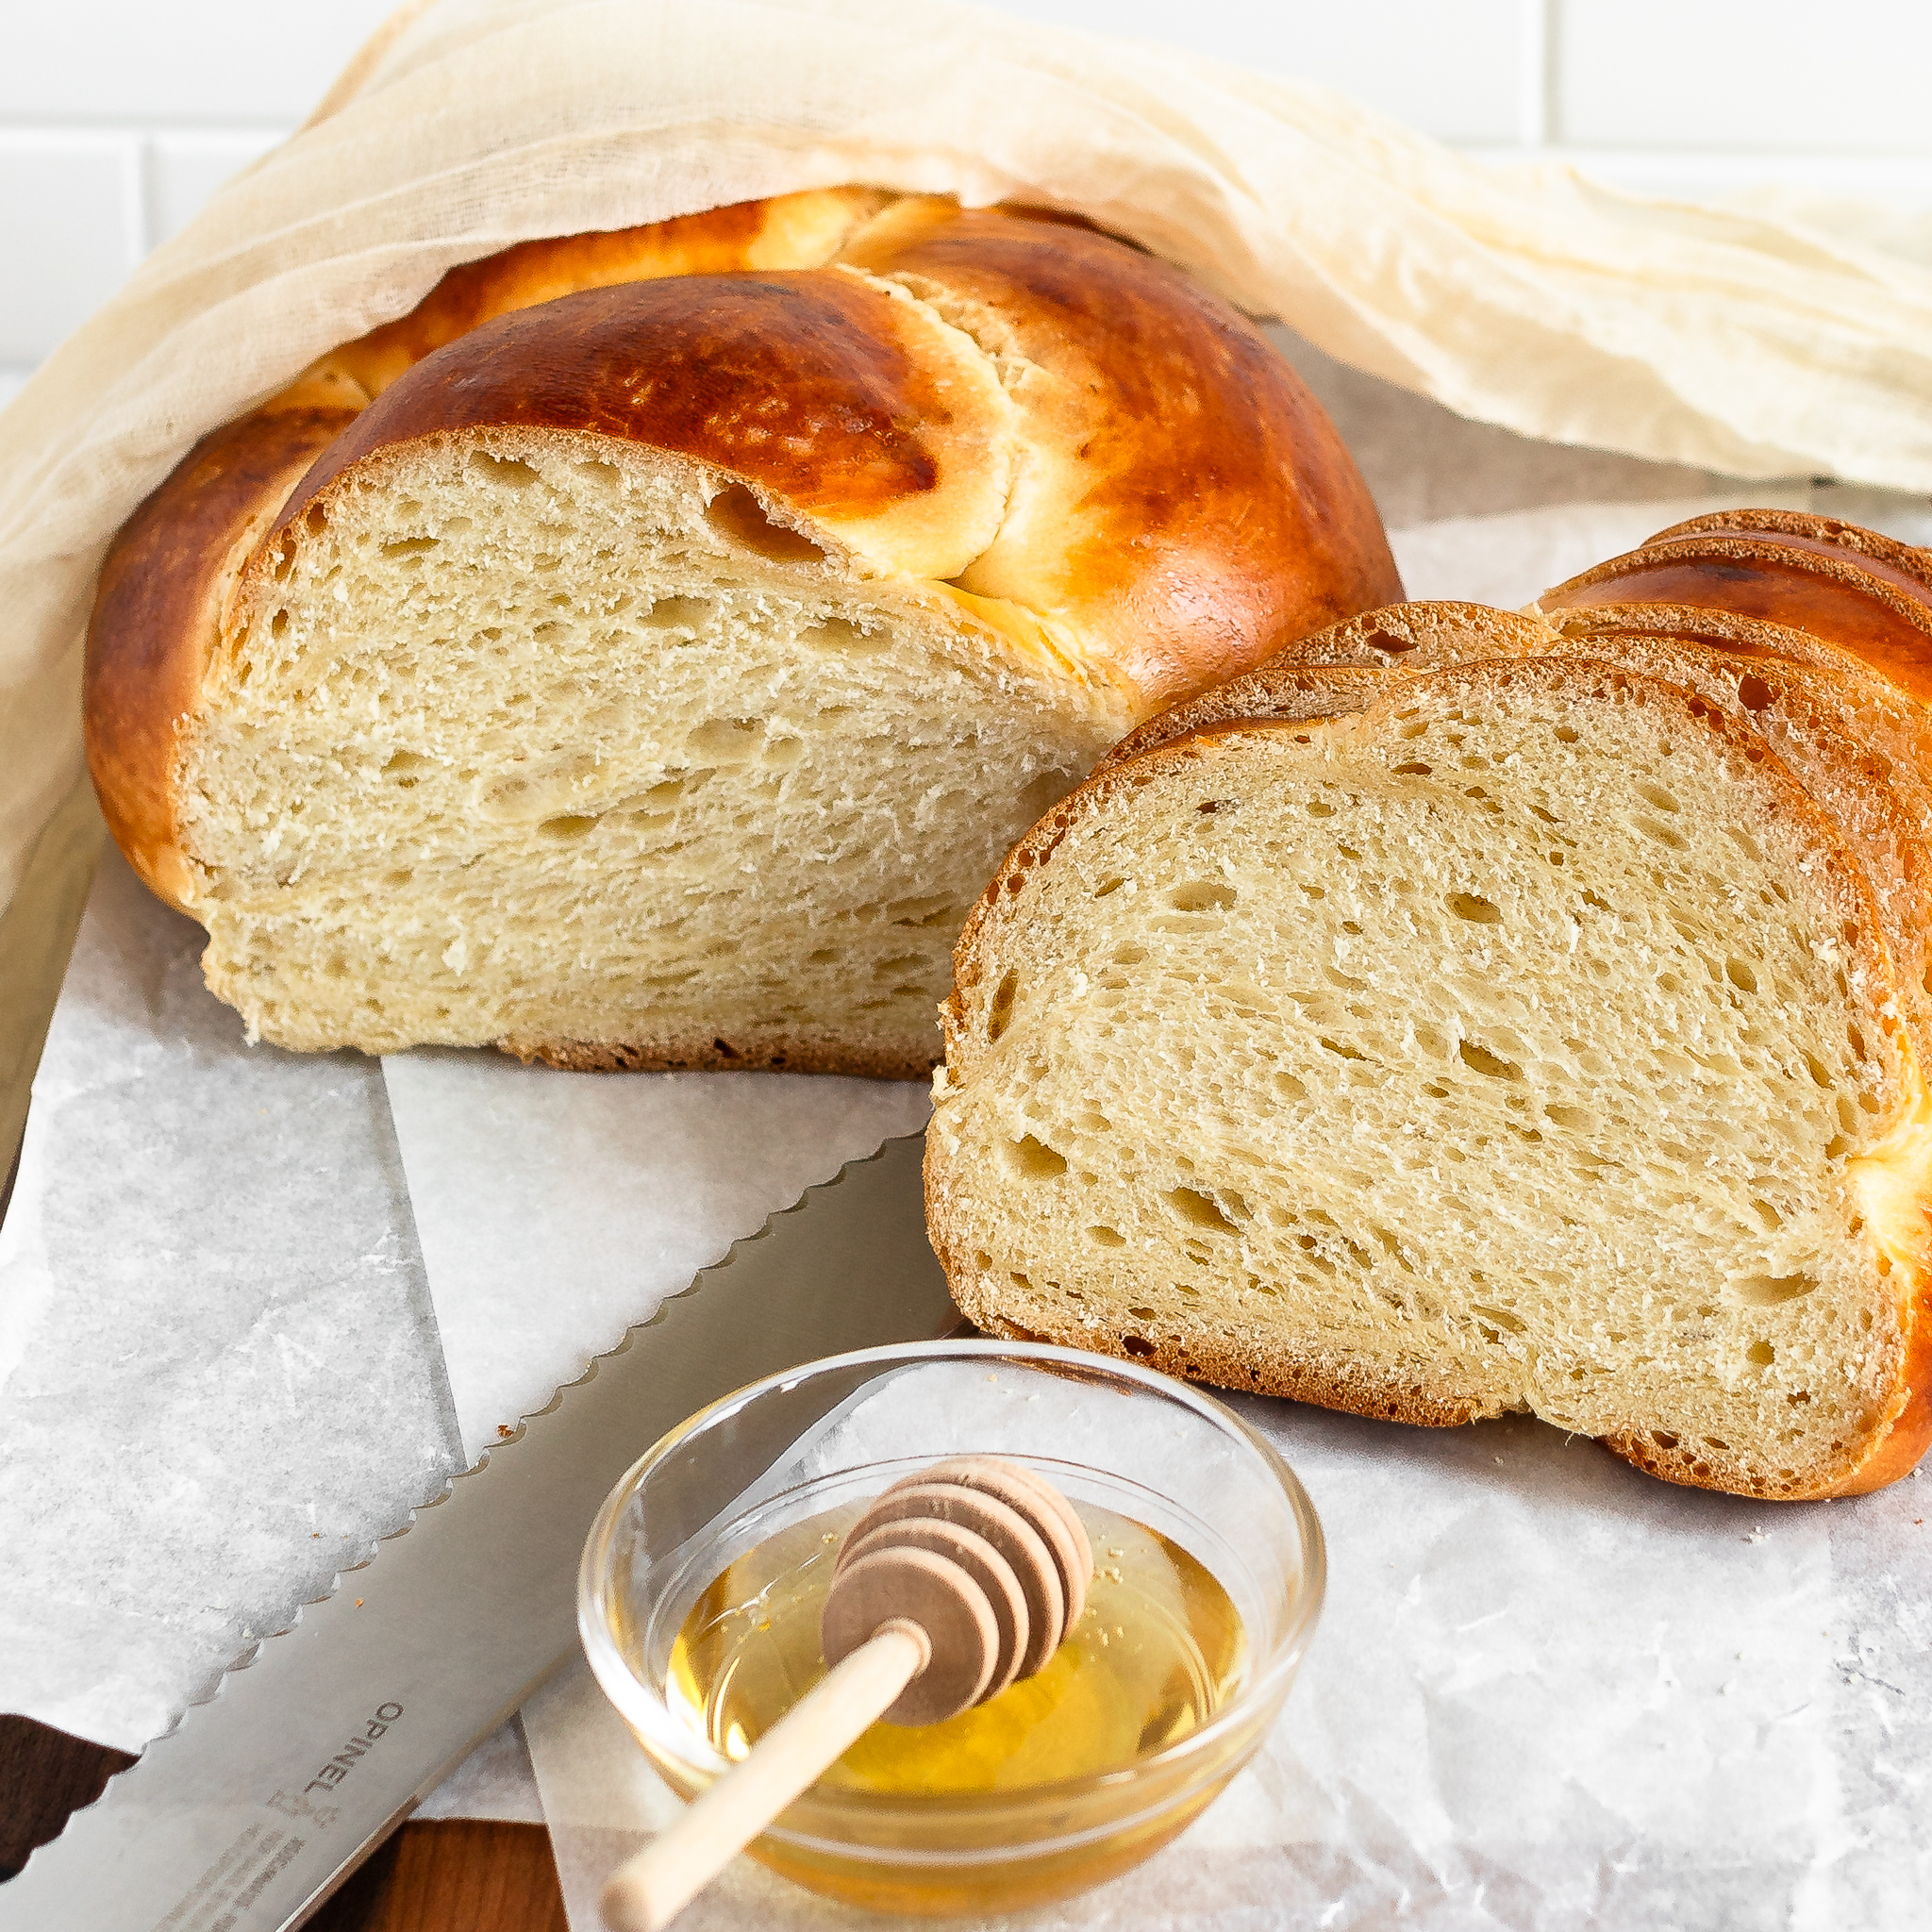 challah sliced on cutting board showing the inside with a bread knife and small bowl of honey in the foreground